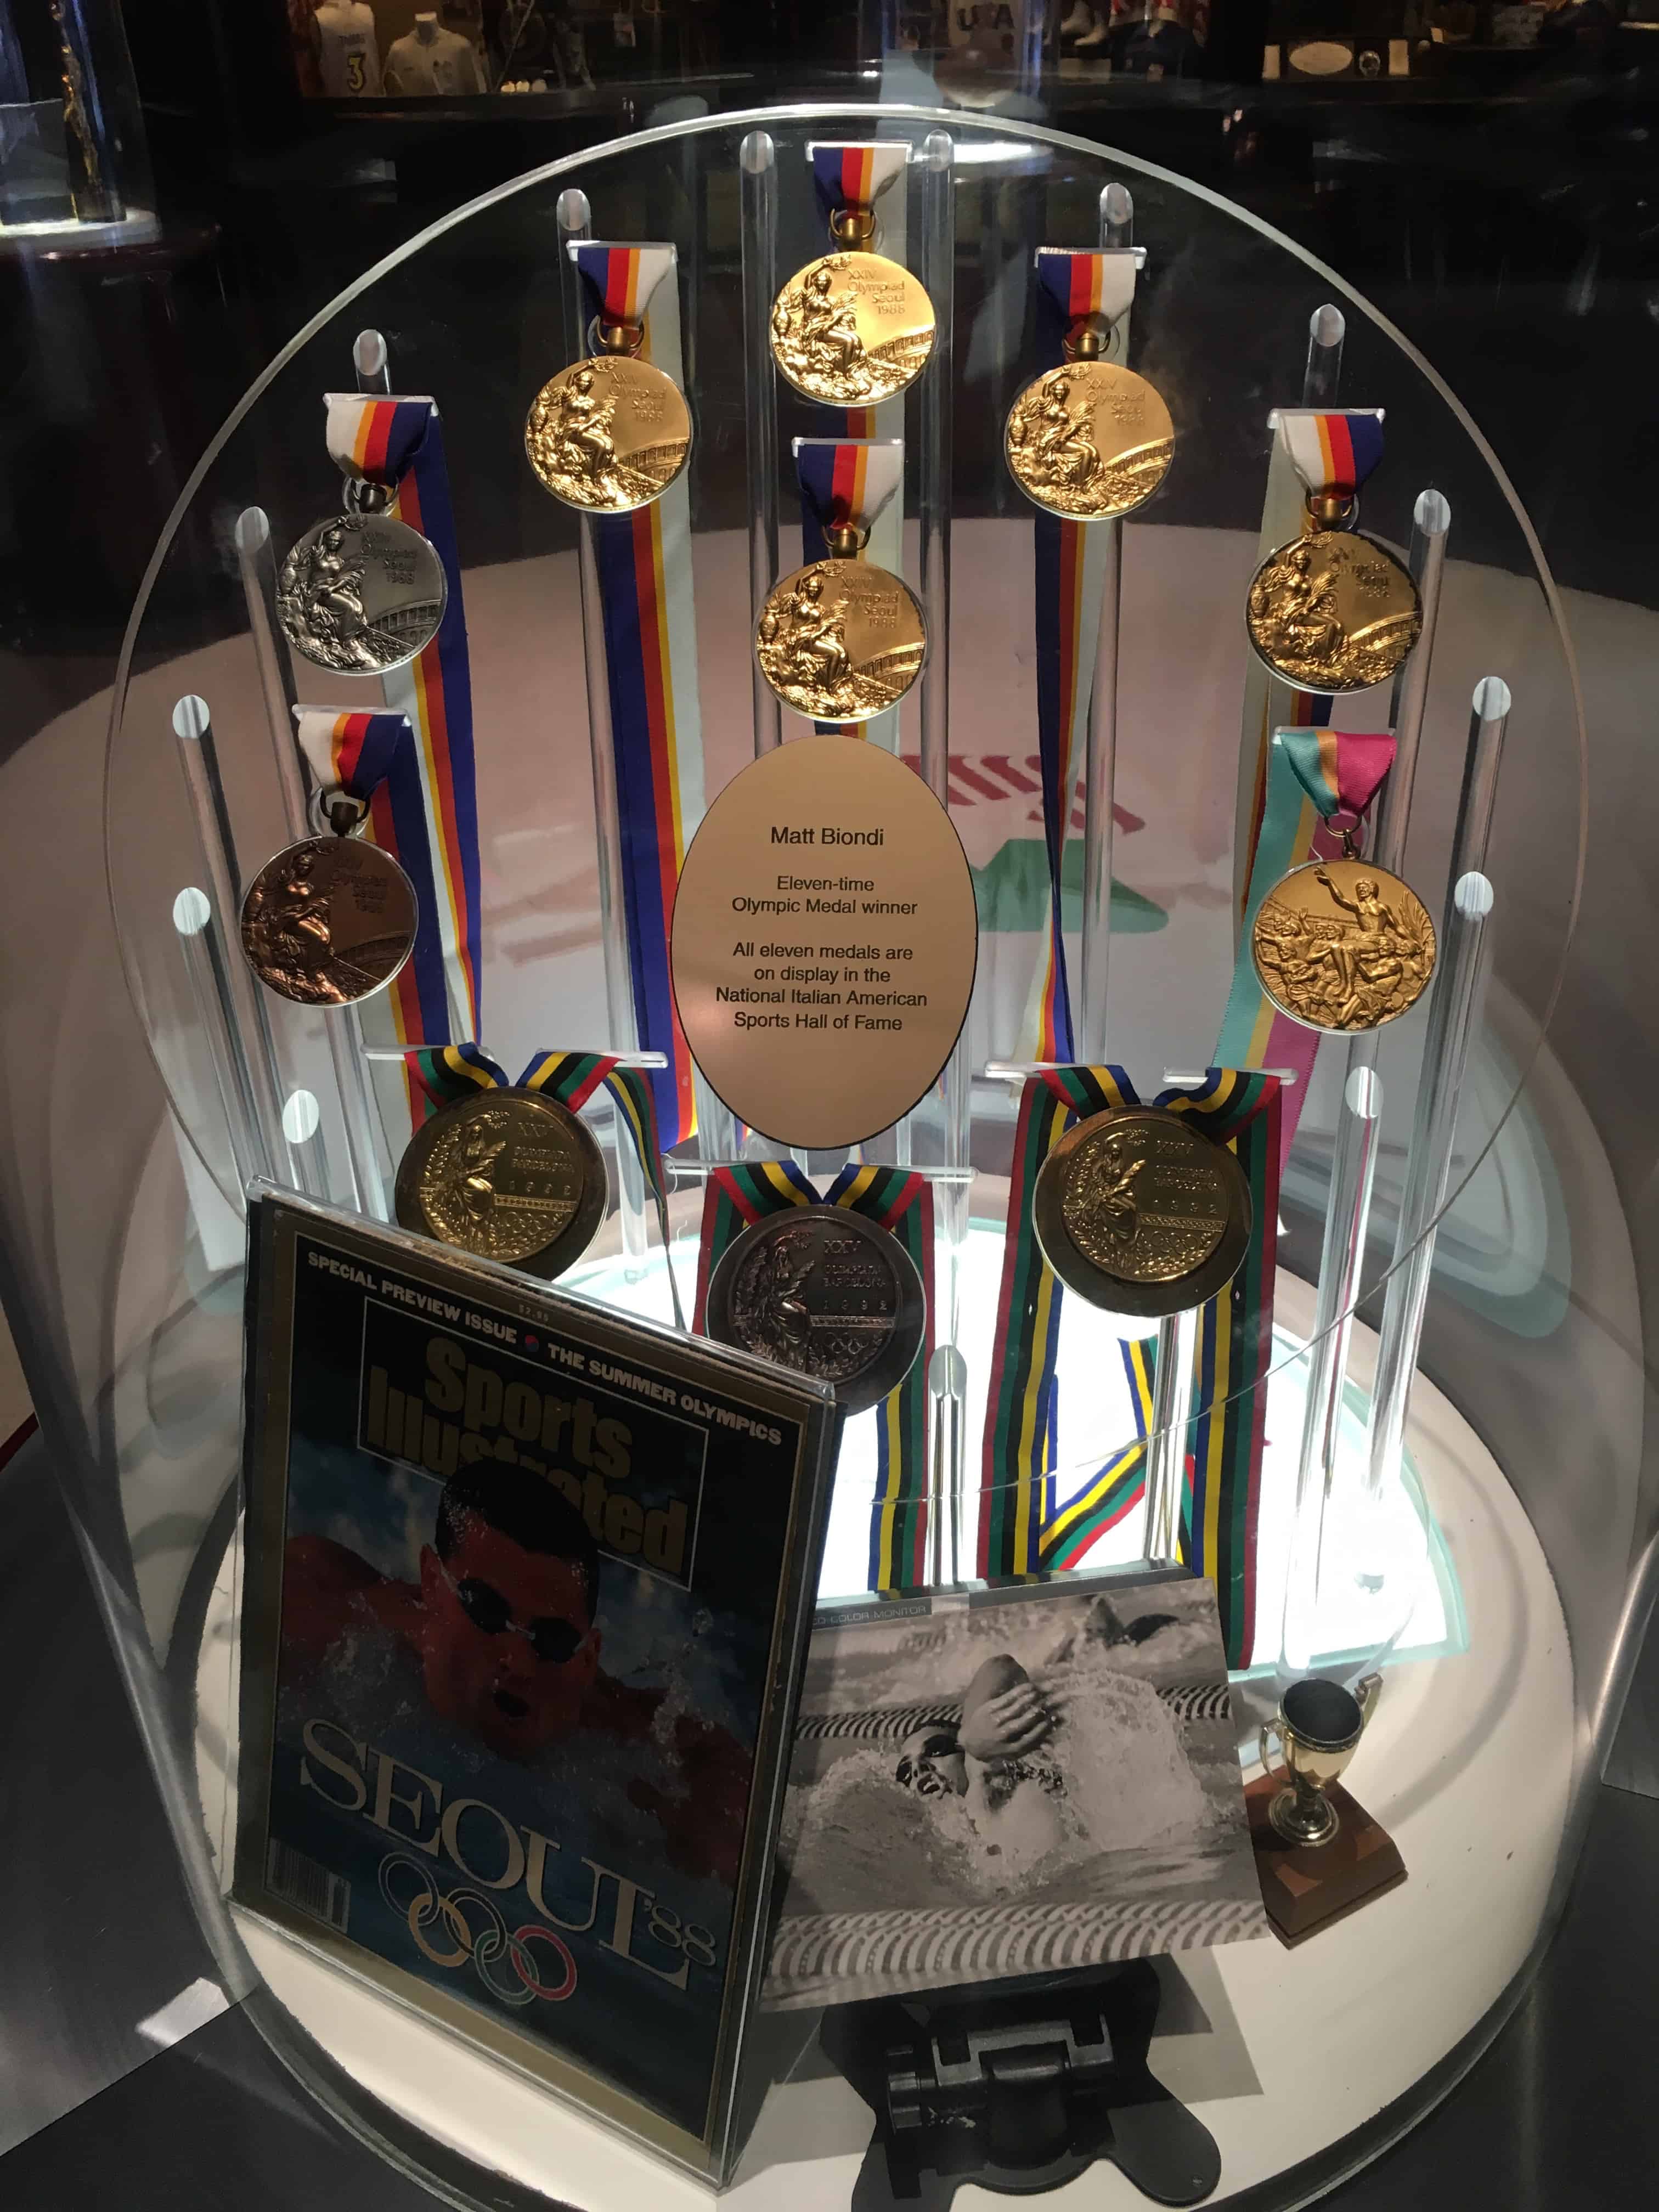 Matt Biondi's Olympic medals at the National Italian American Sports Hall of Fame in Chicago, Illinois